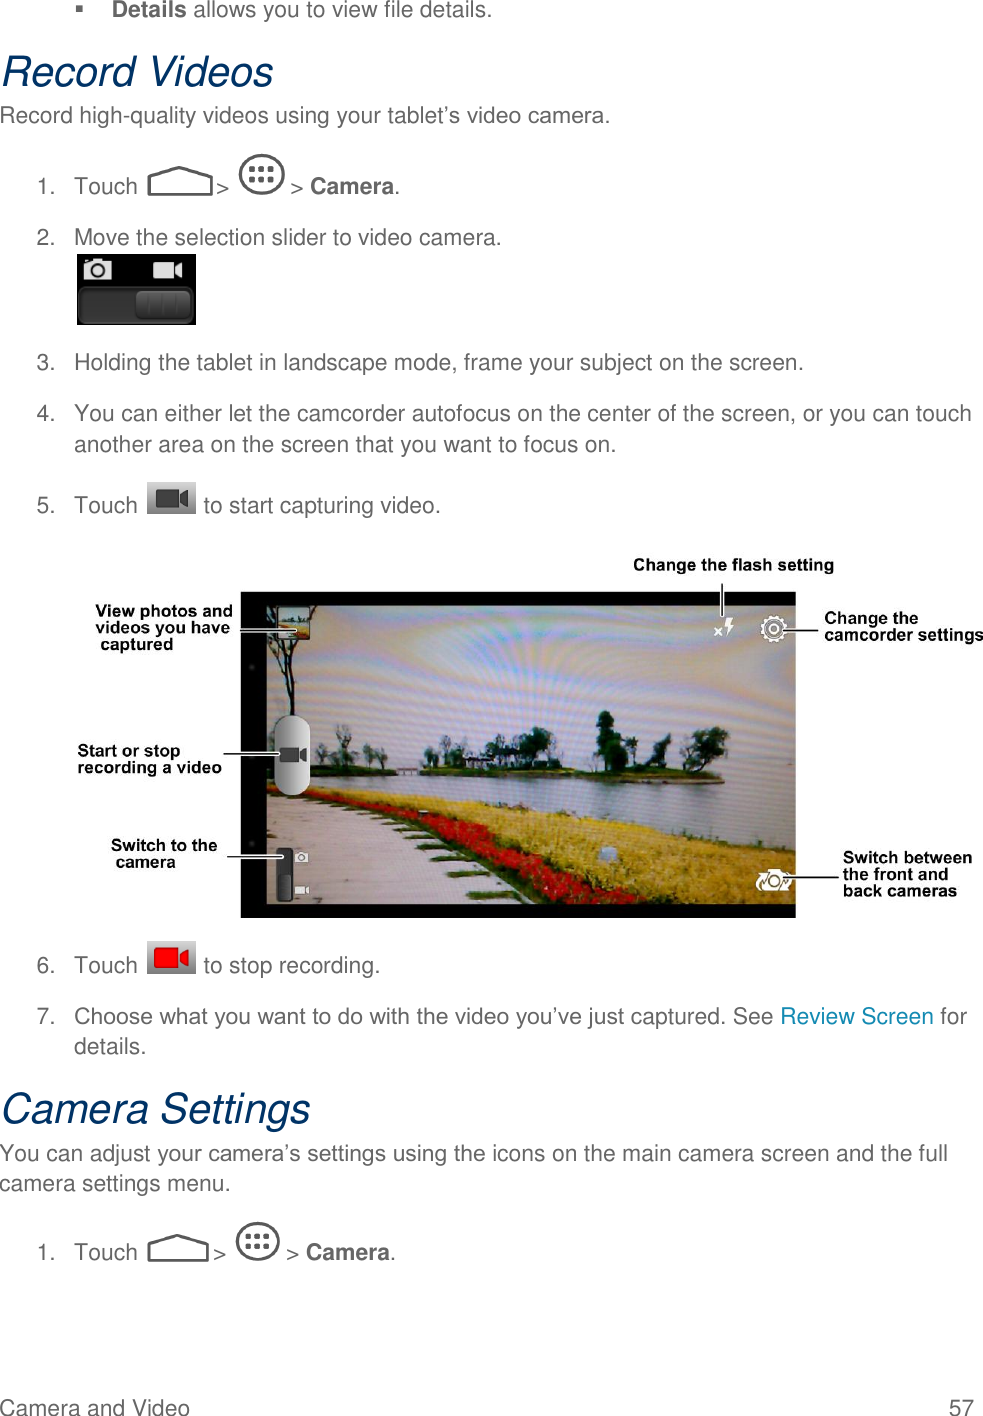  Camera and Video  57  Details allows you to view file details. Record Videos Record high-quality videos using your tablet’s video camera. 1.  Touch   &gt;   &gt; Camera. 2.  Move the selection slider to video camera.  3.  Holding the tablet in landscape mode, frame your subject on the screen. 4.  You can either let the camcorder autofocus on the center of the screen, or you can touch another area on the screen that you want to focus on. 5.  Touch   to start capturing video.   6.  Touch   to stop recording. 7. Choose what you want to do with the video you’ve just captured. See Review Screen for details. Camera Settings You can adjust your camera’s settings using the icons on the main camera screen and the full camera settings menu. 1.  Touch   &gt;   &gt; Camera. 